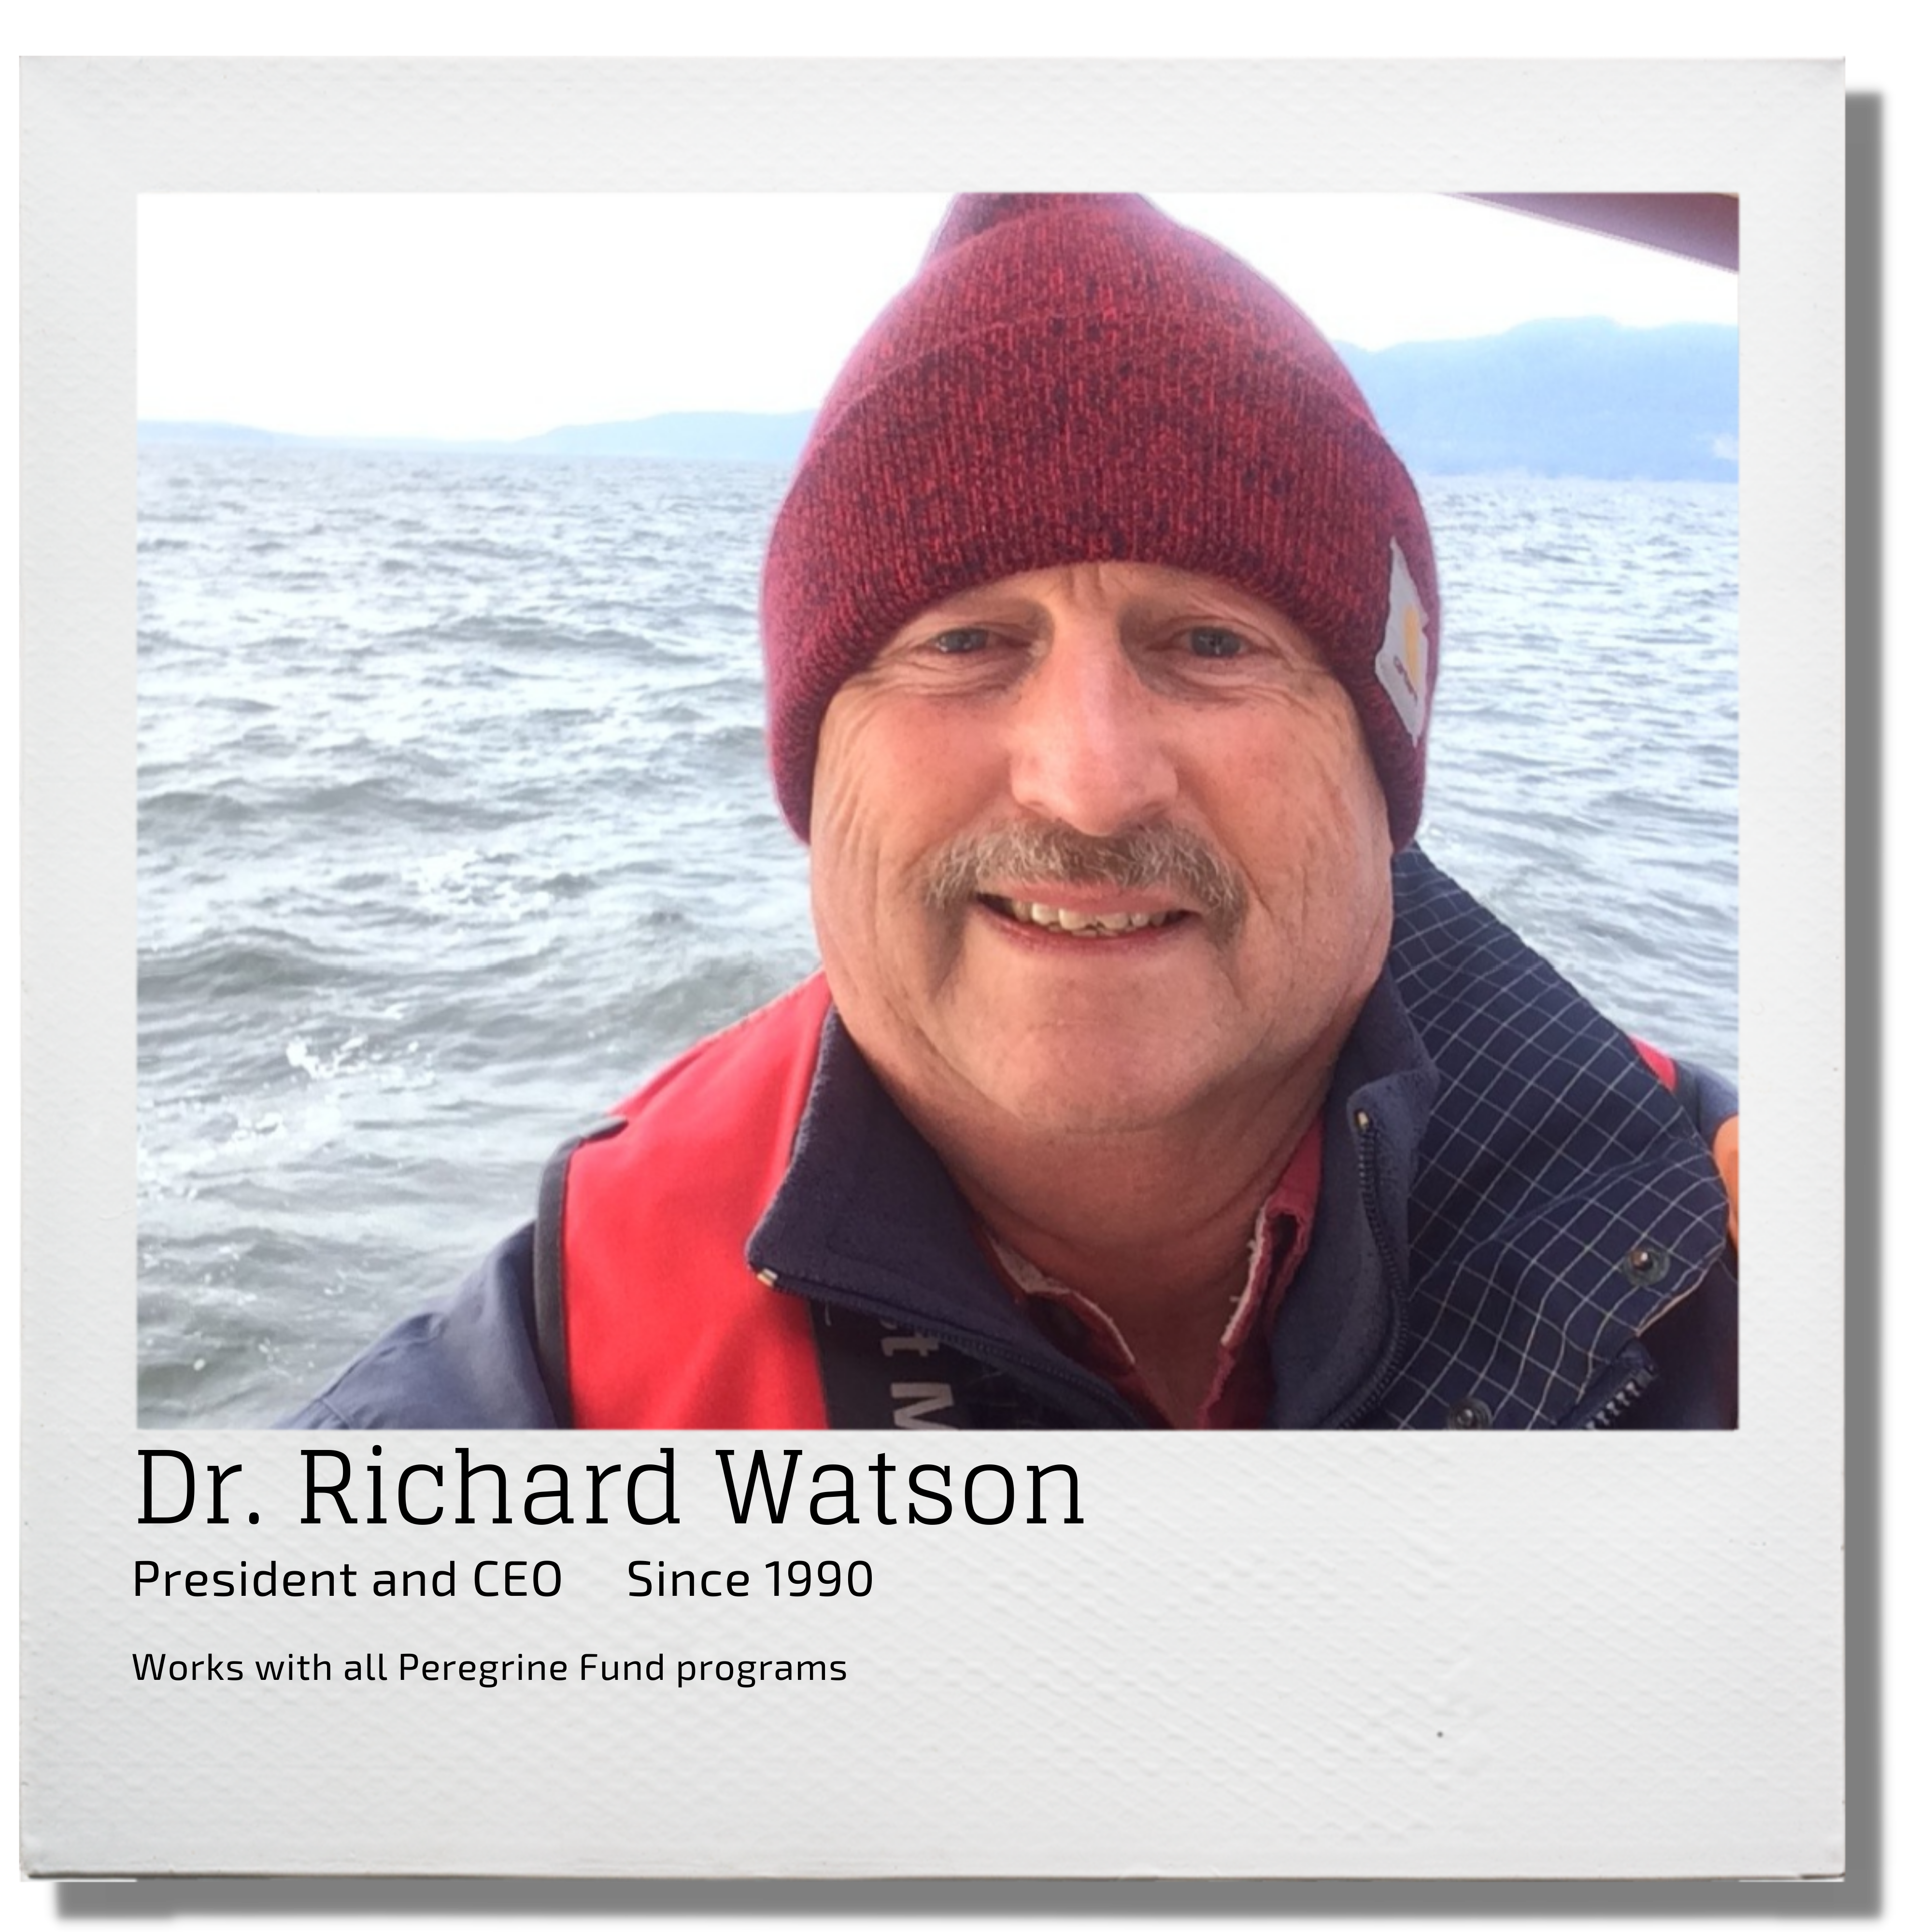 Dr Richard Watson President and CEO Since 1990 Works with all Peregrine Fund programs